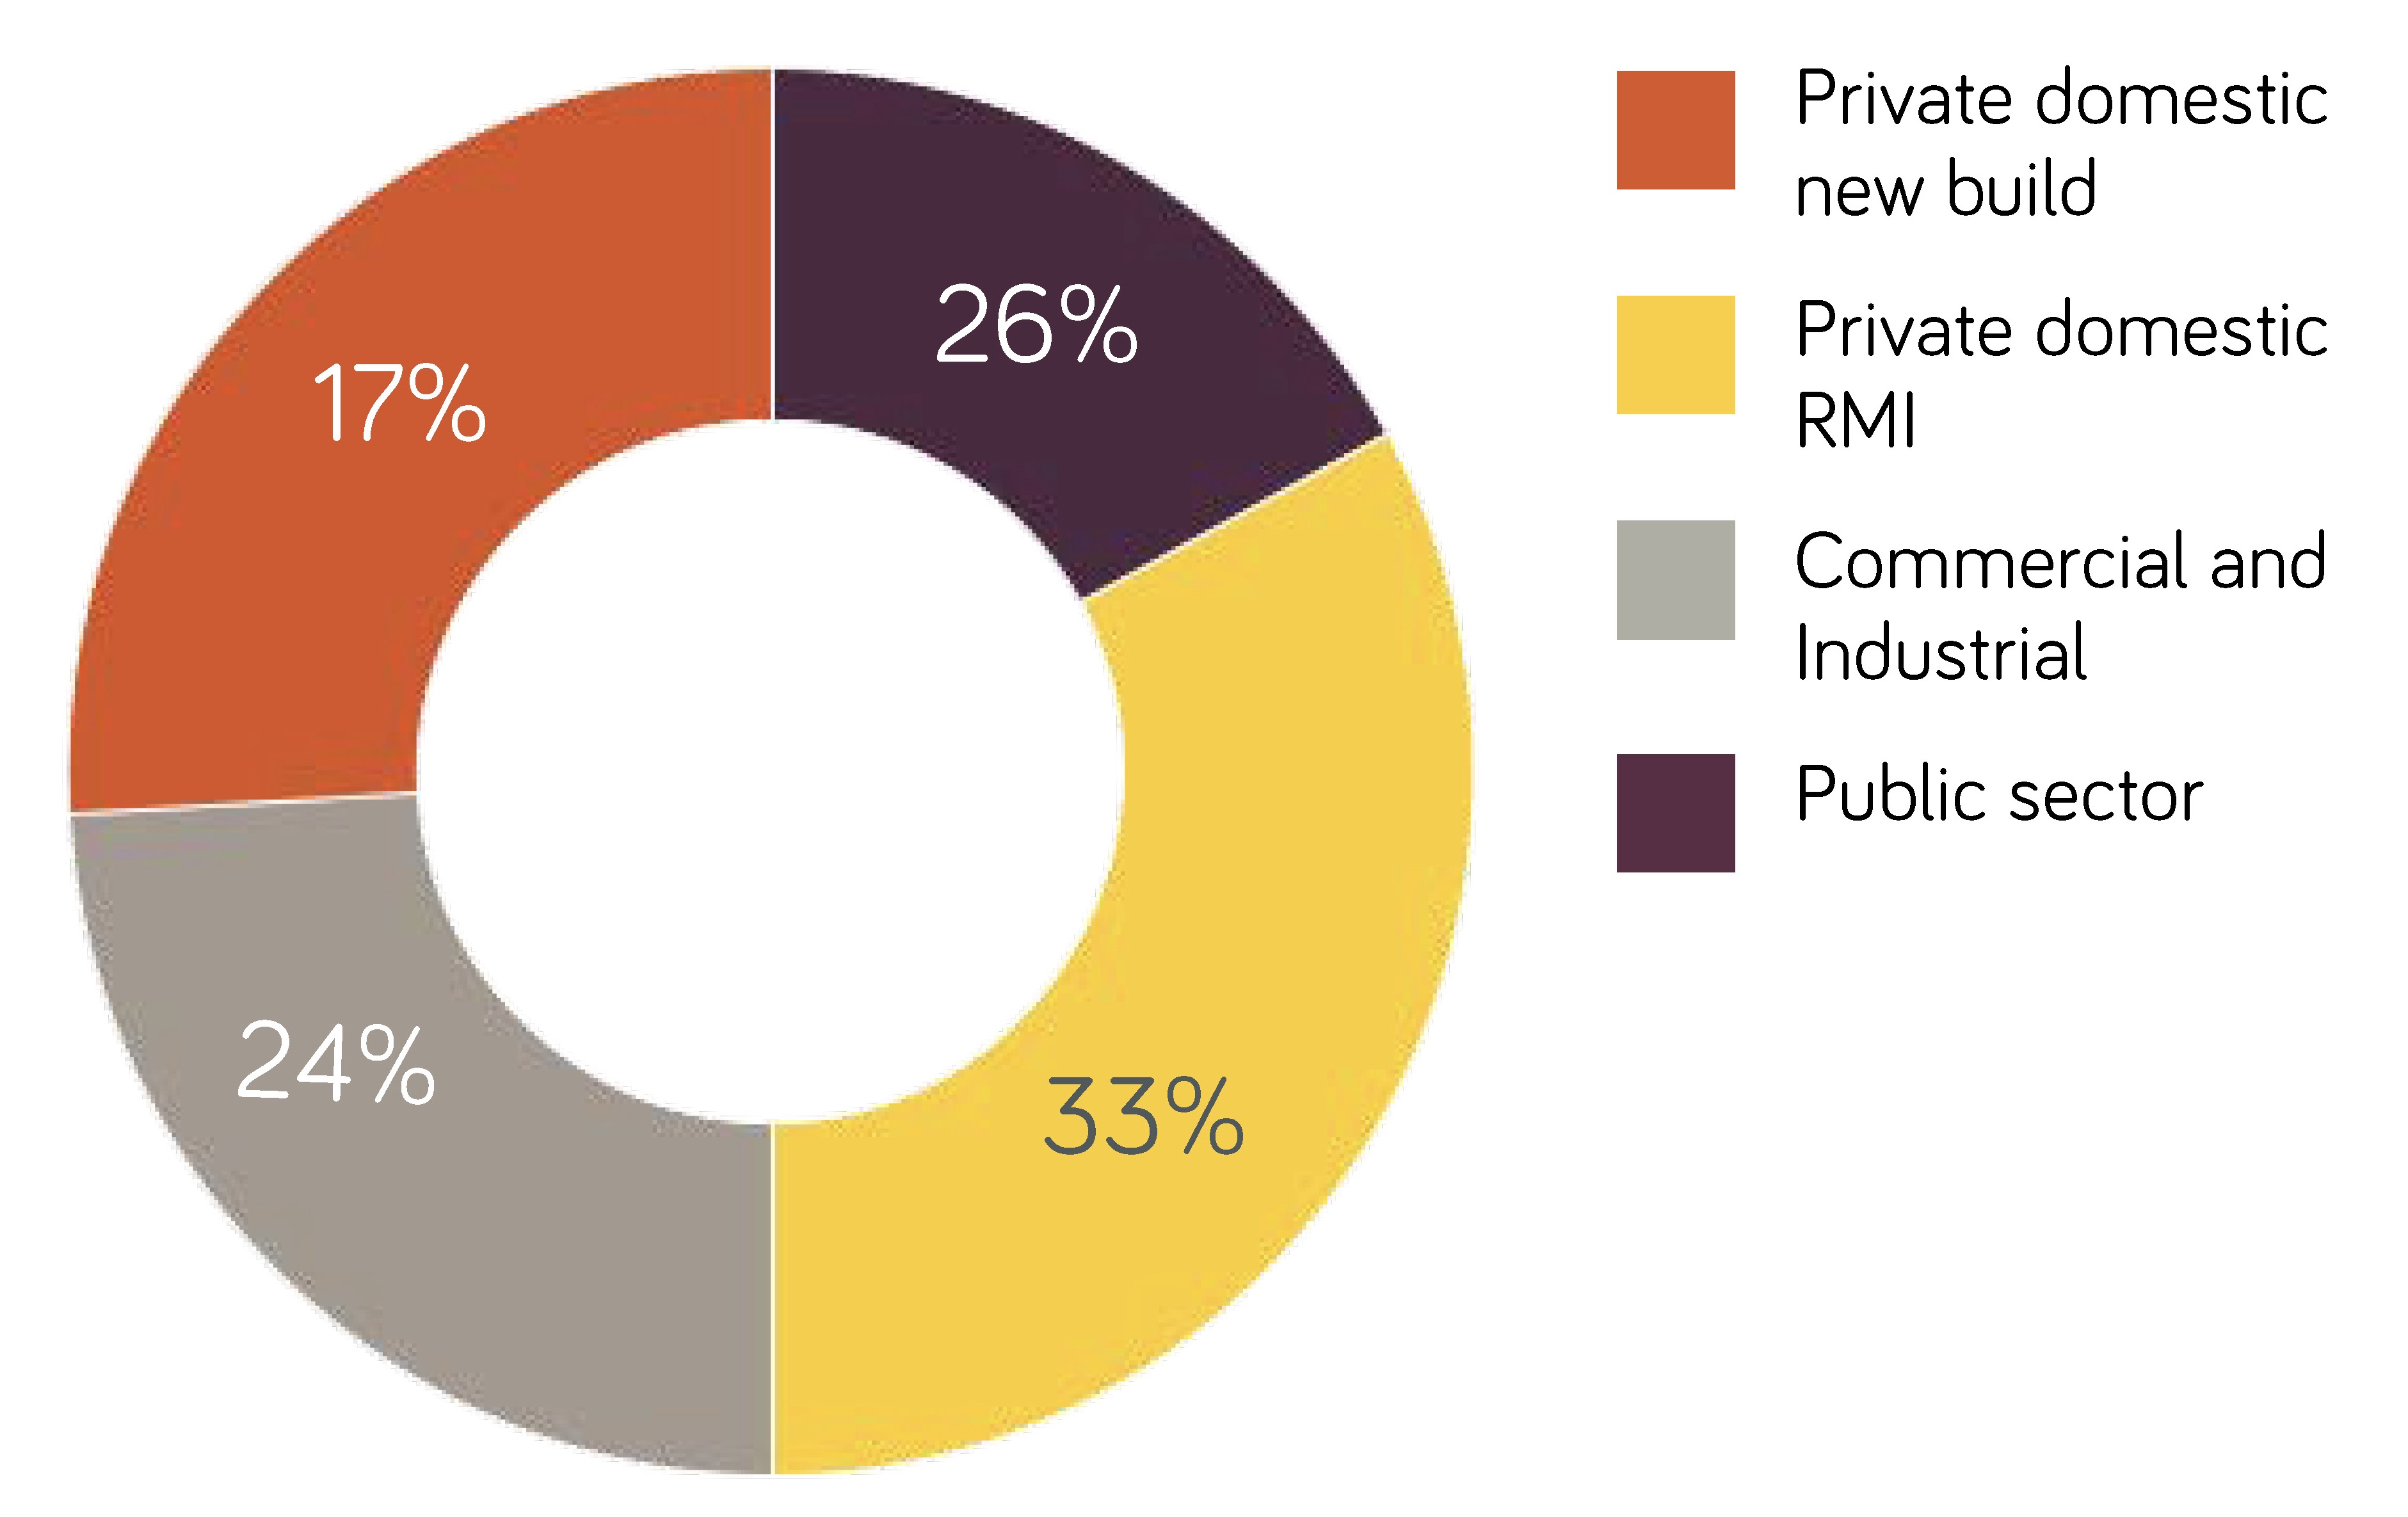 Image shows private domestic new build = 17%, Private domestic RMI = 33%, Commercial and Industrial = 24% and Public sector = 26%